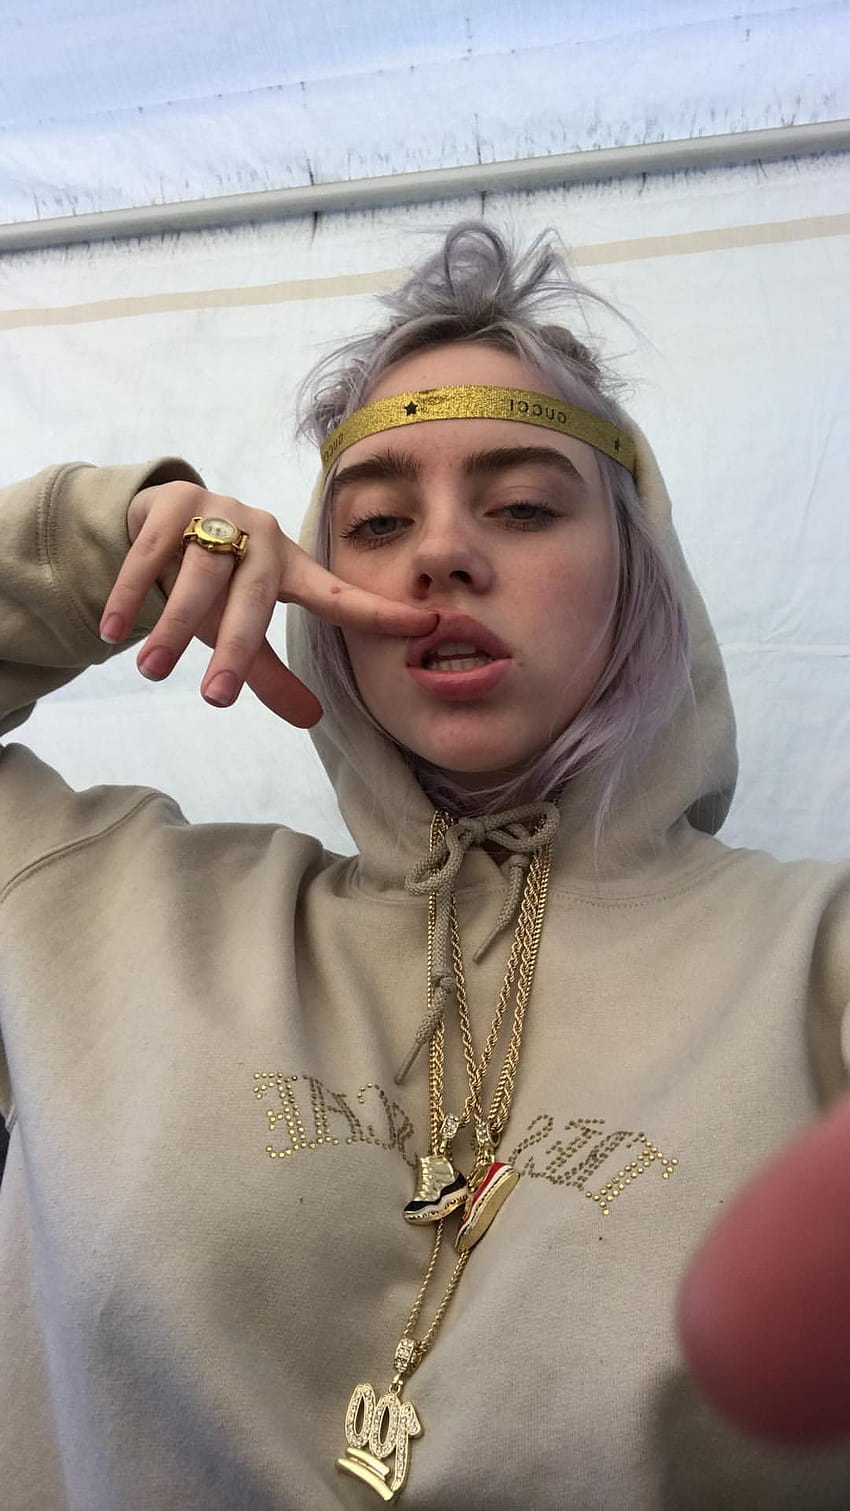 My bed is draped in Gucci linen, billie eilish wearing gucci HD phone wallpaper